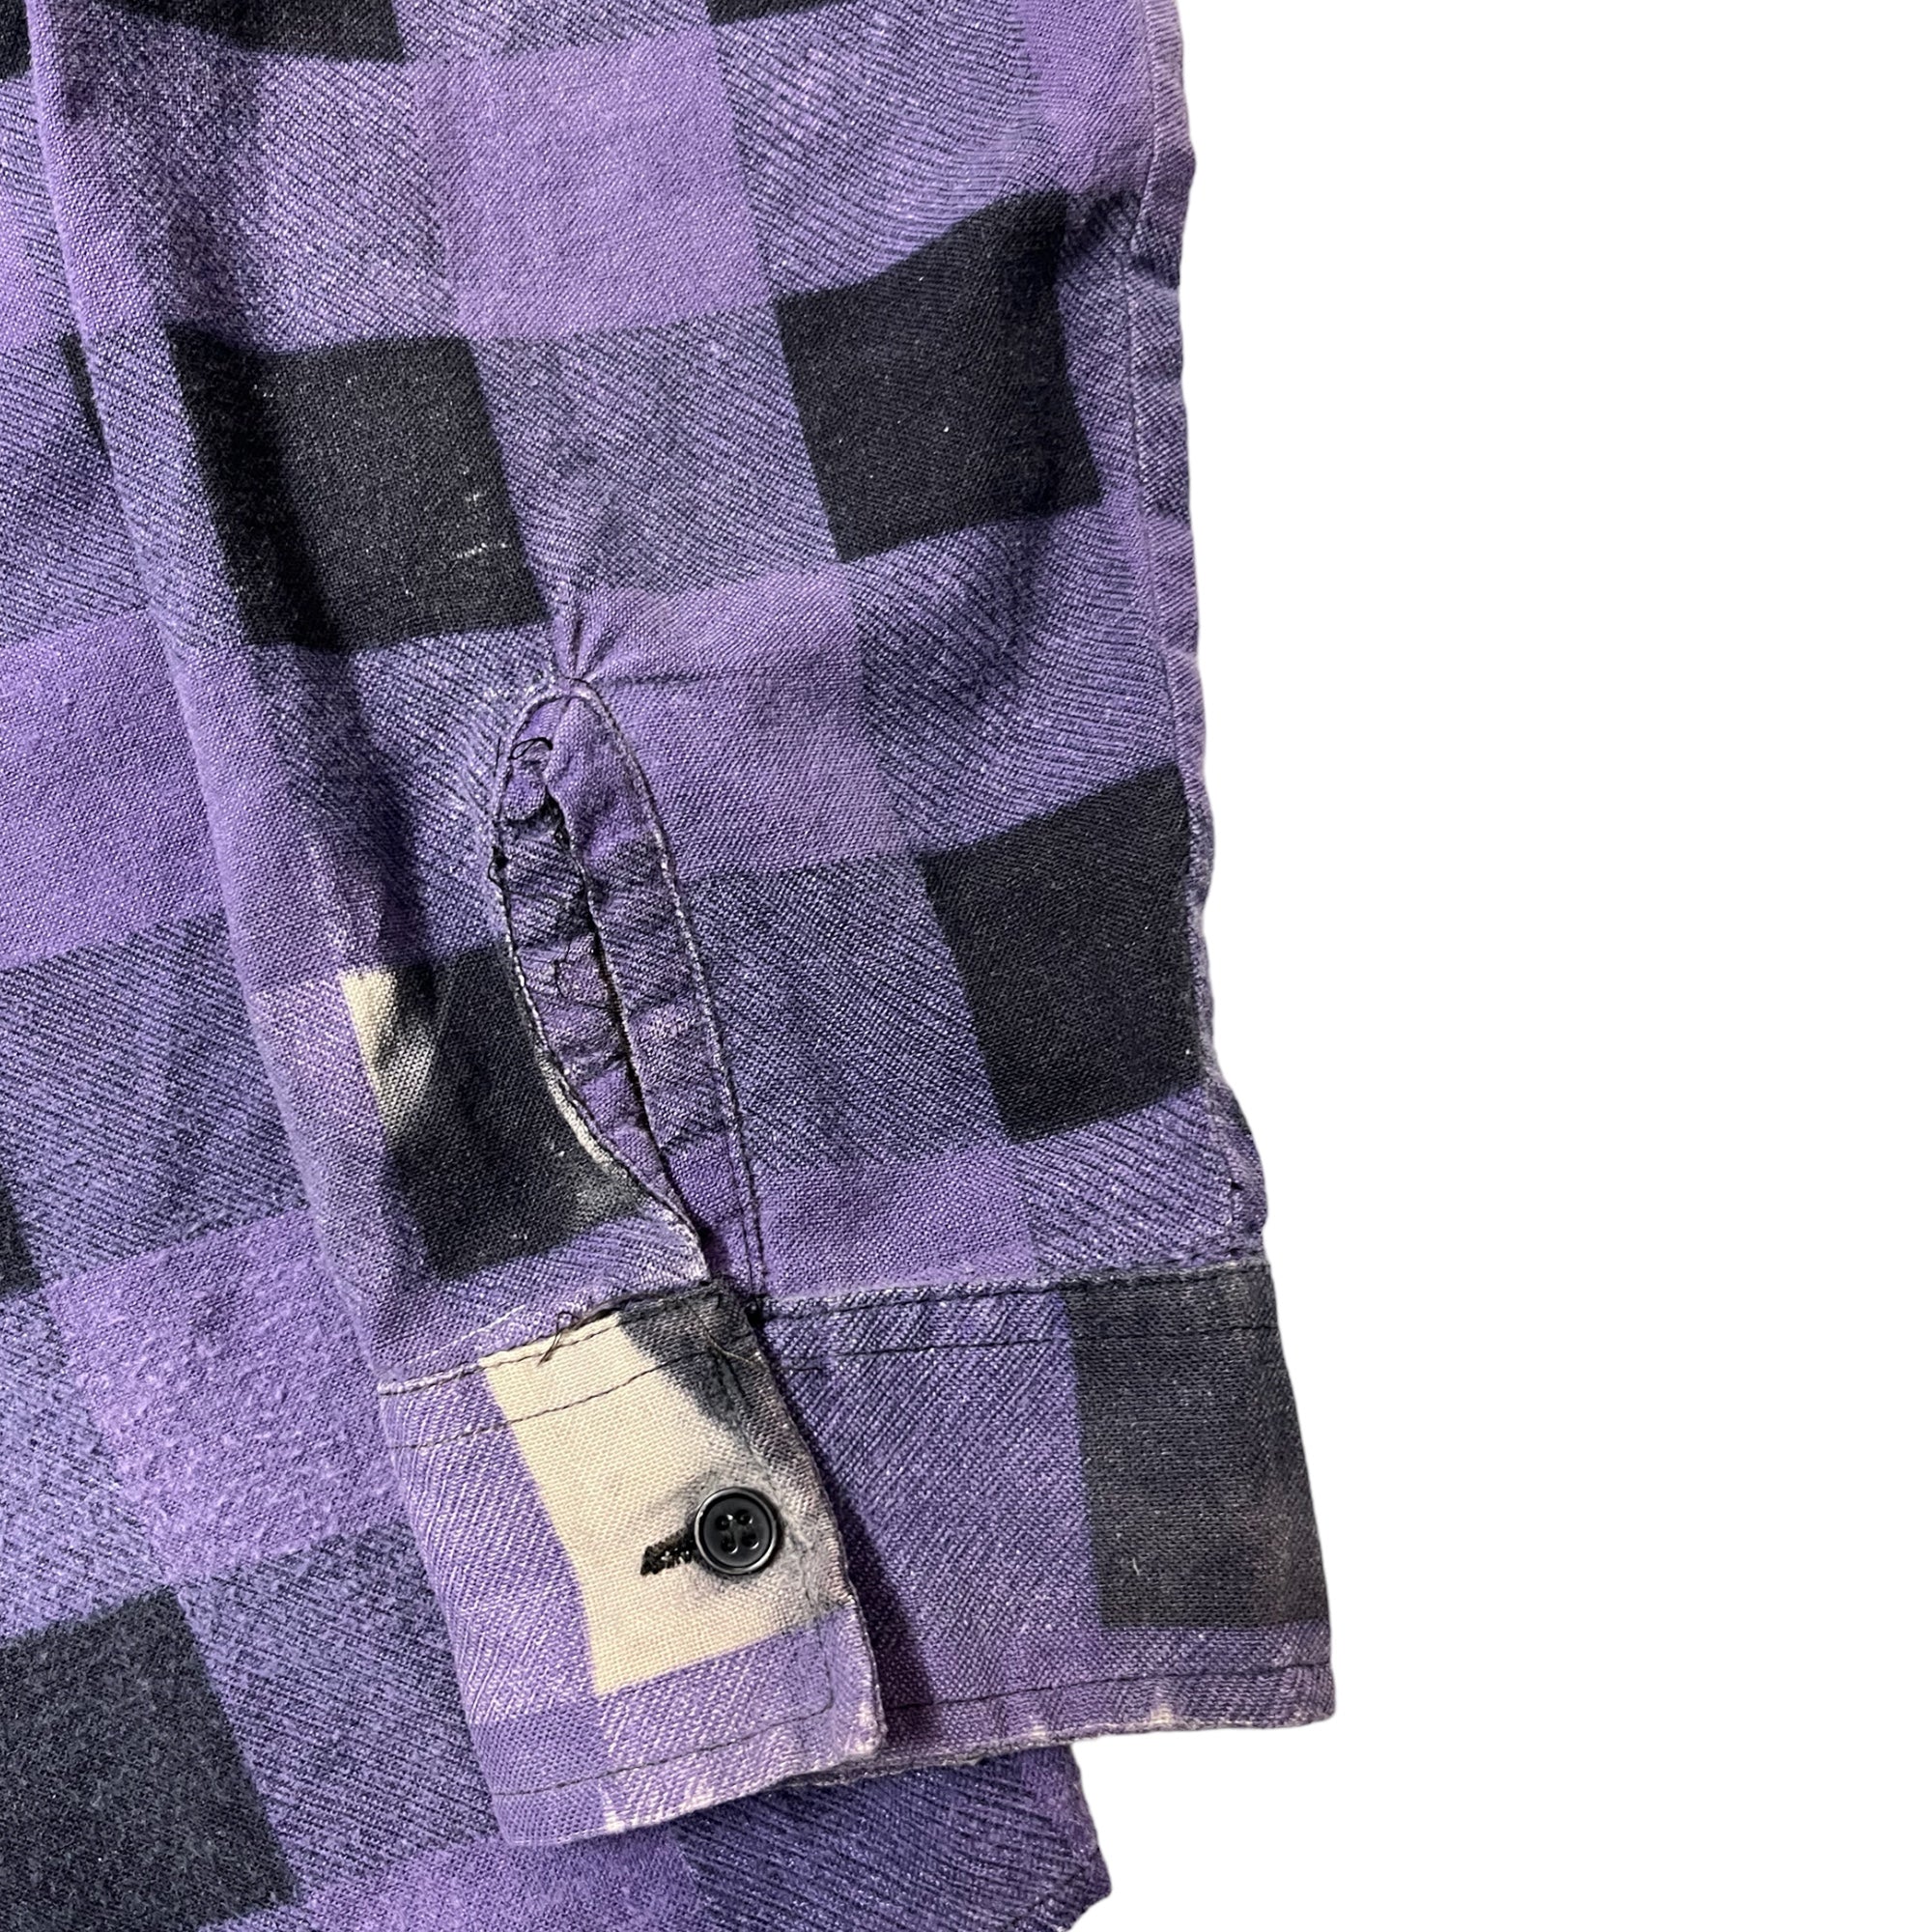 1970s Distressed Sun Drenched Printed Flannel - Purple/Black - XL